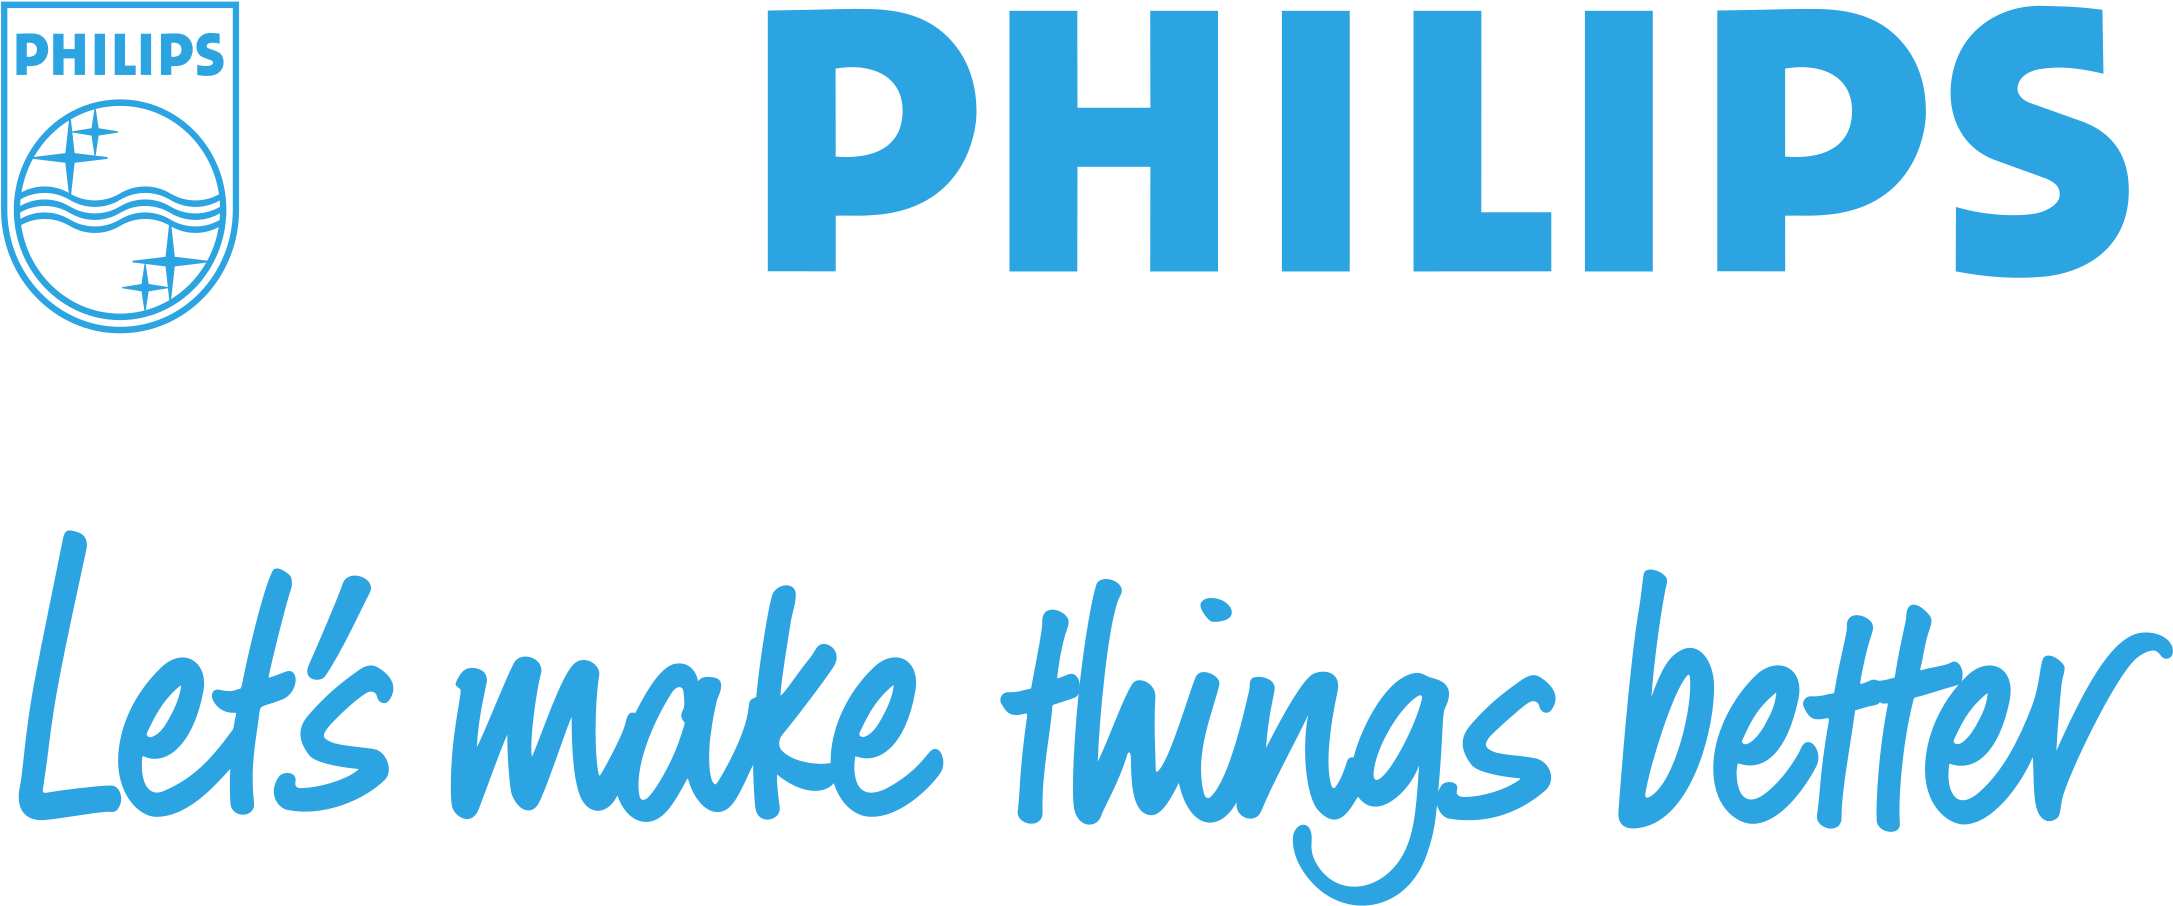 Philips Logo Png Transparent - Philips Let's Make Things Better (2400x2400), Png Download